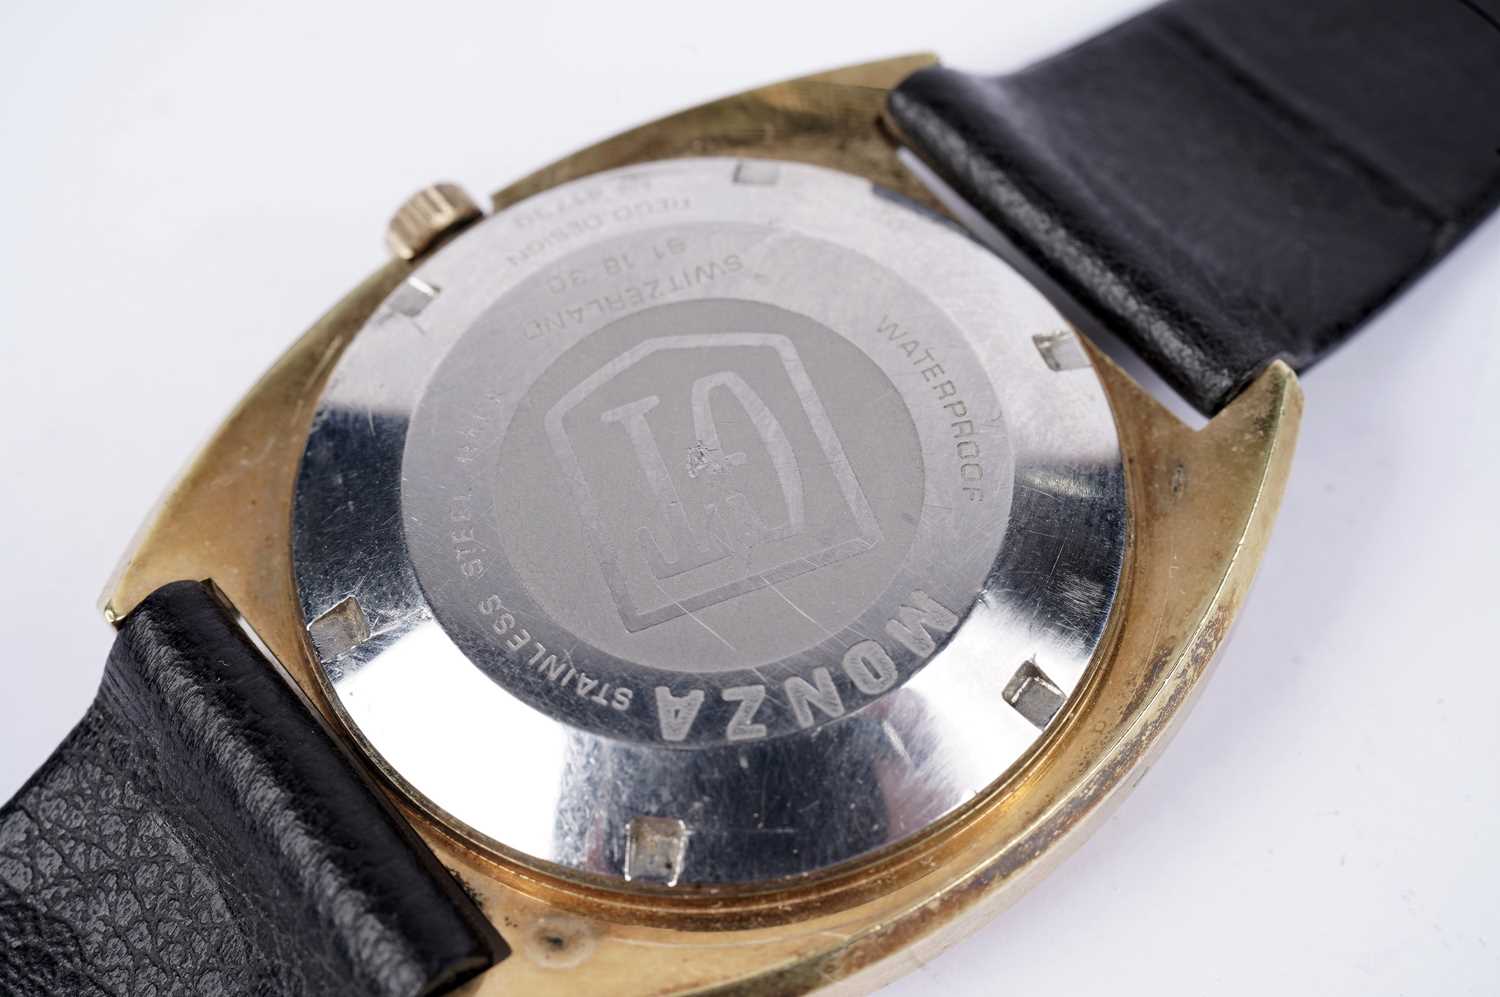 Rotary Automatic GT Monza: a gentleman's stainless steel and giltmetal wristwatch - Image 4 of 4